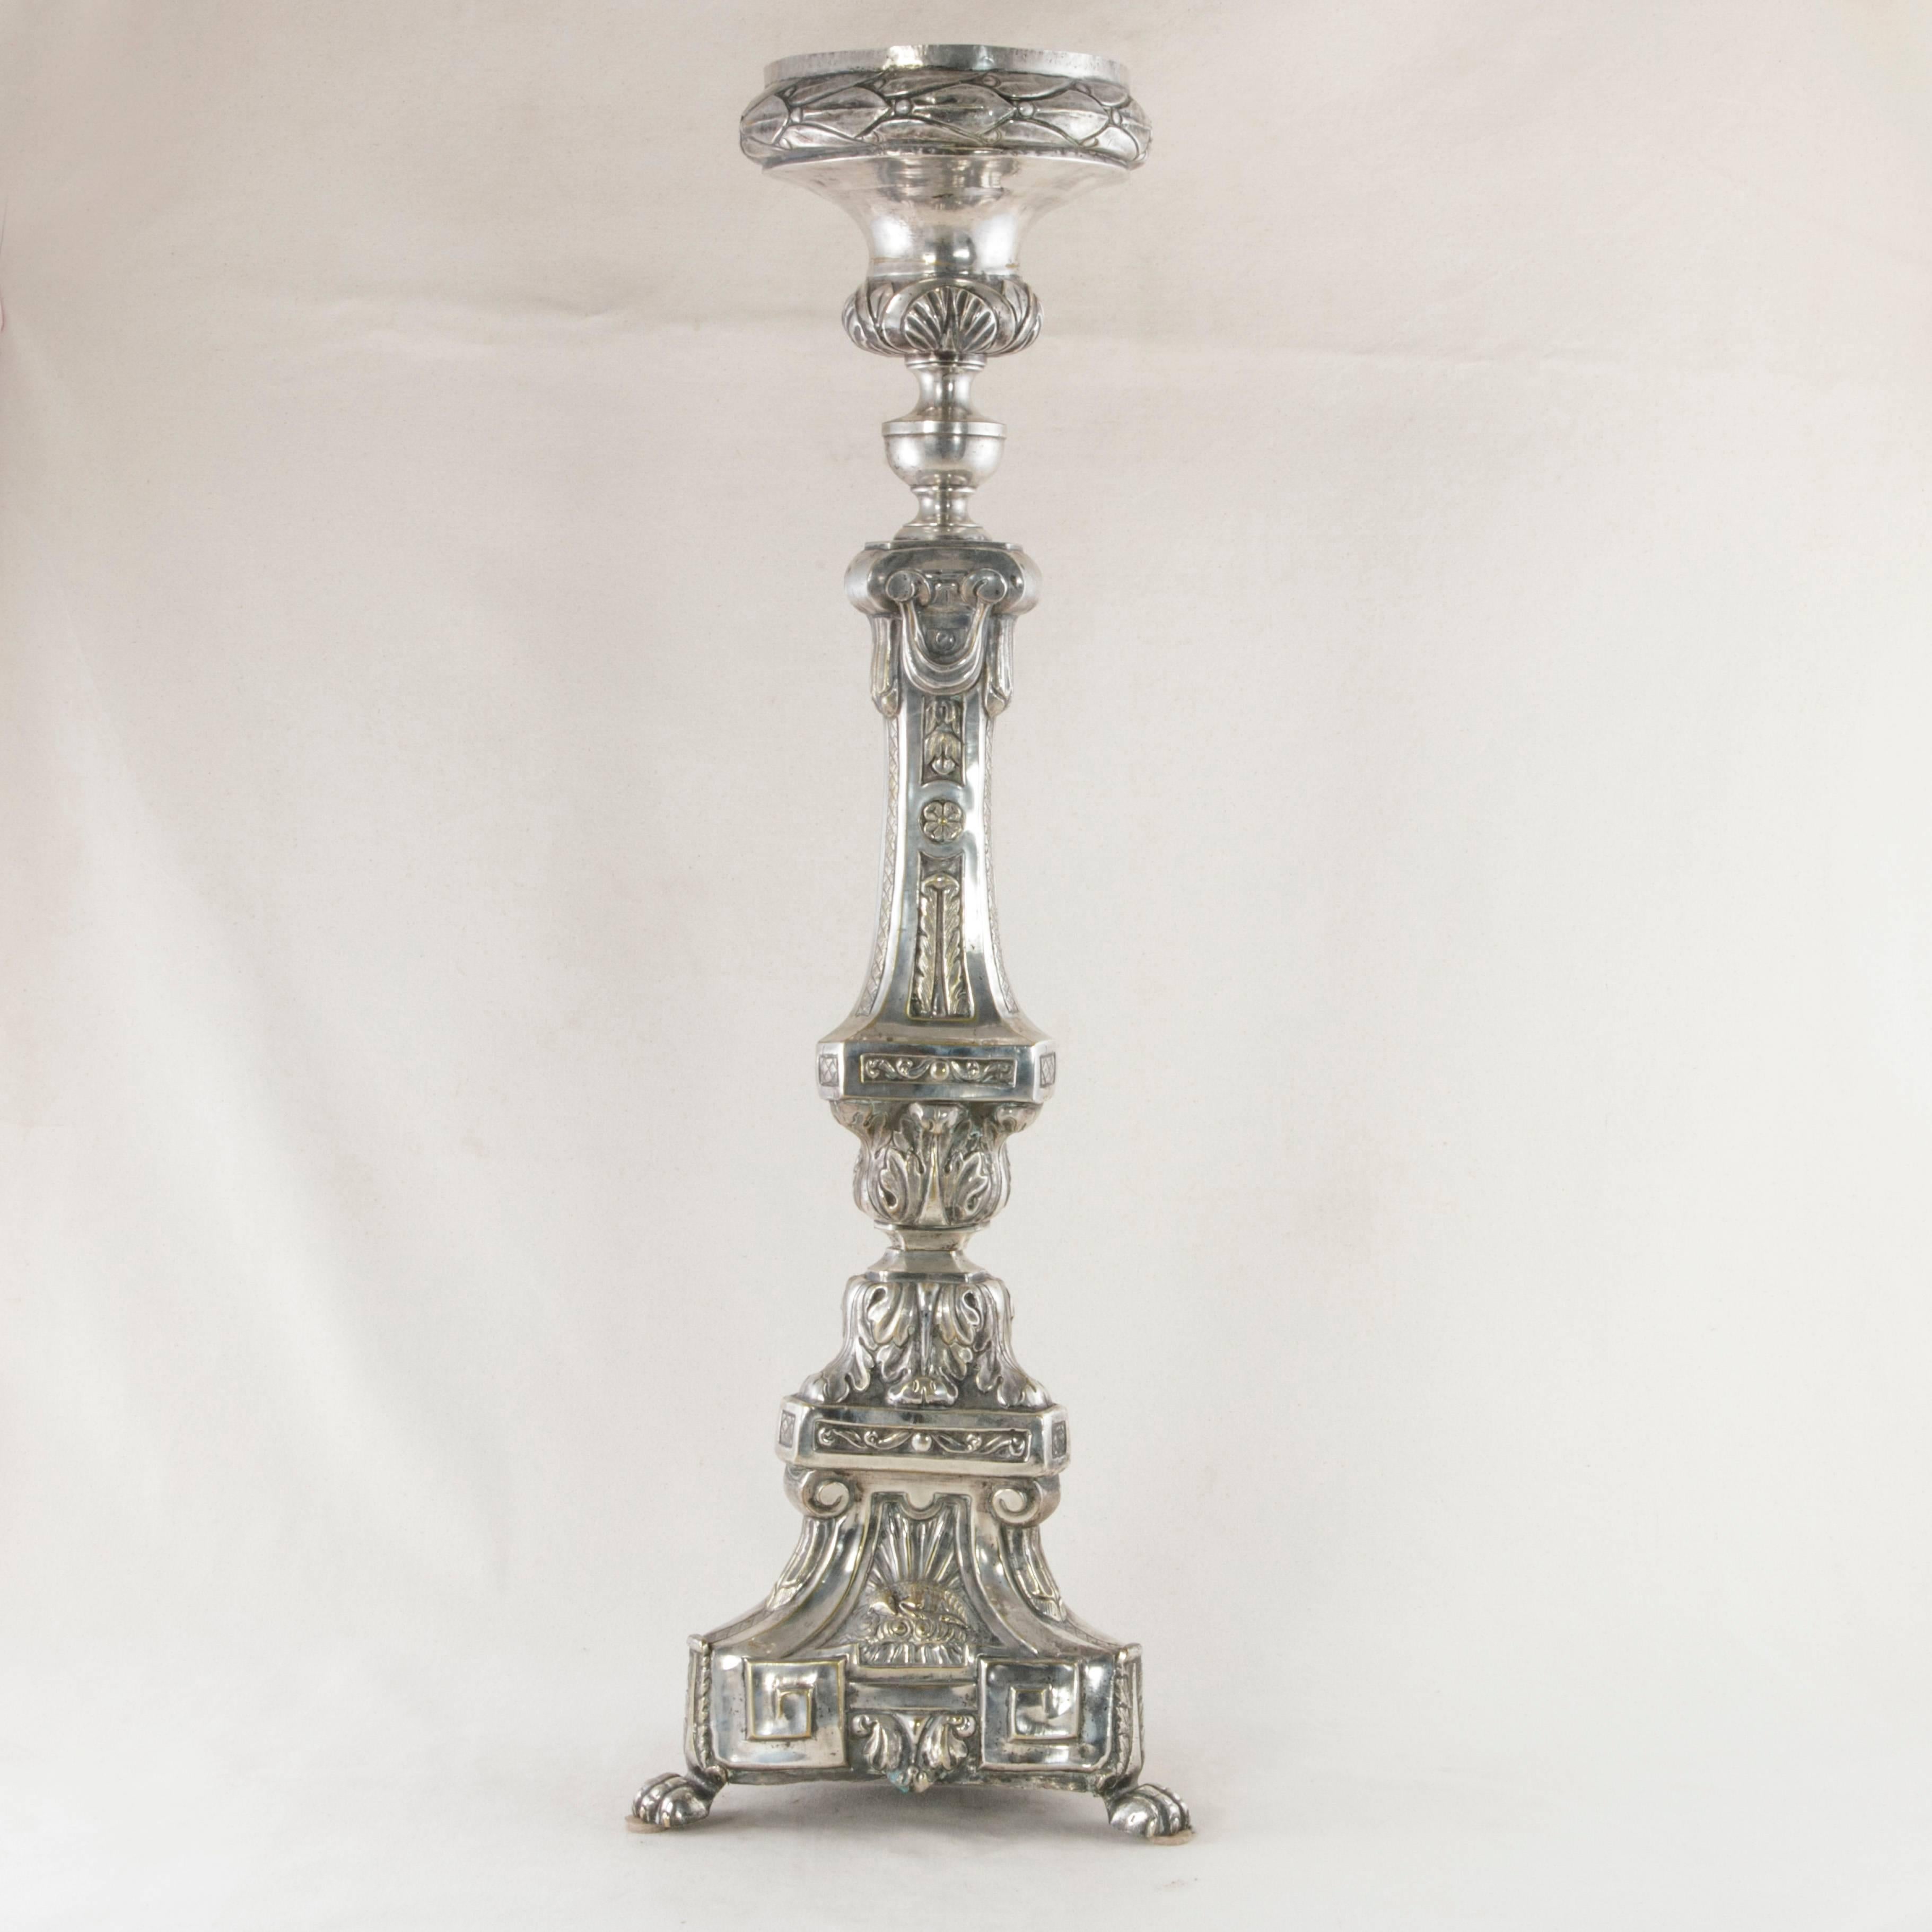 Repoussé Late 19th Century Very Tall Silver Repousse Pricket, Candlestick, Pic-Cierge